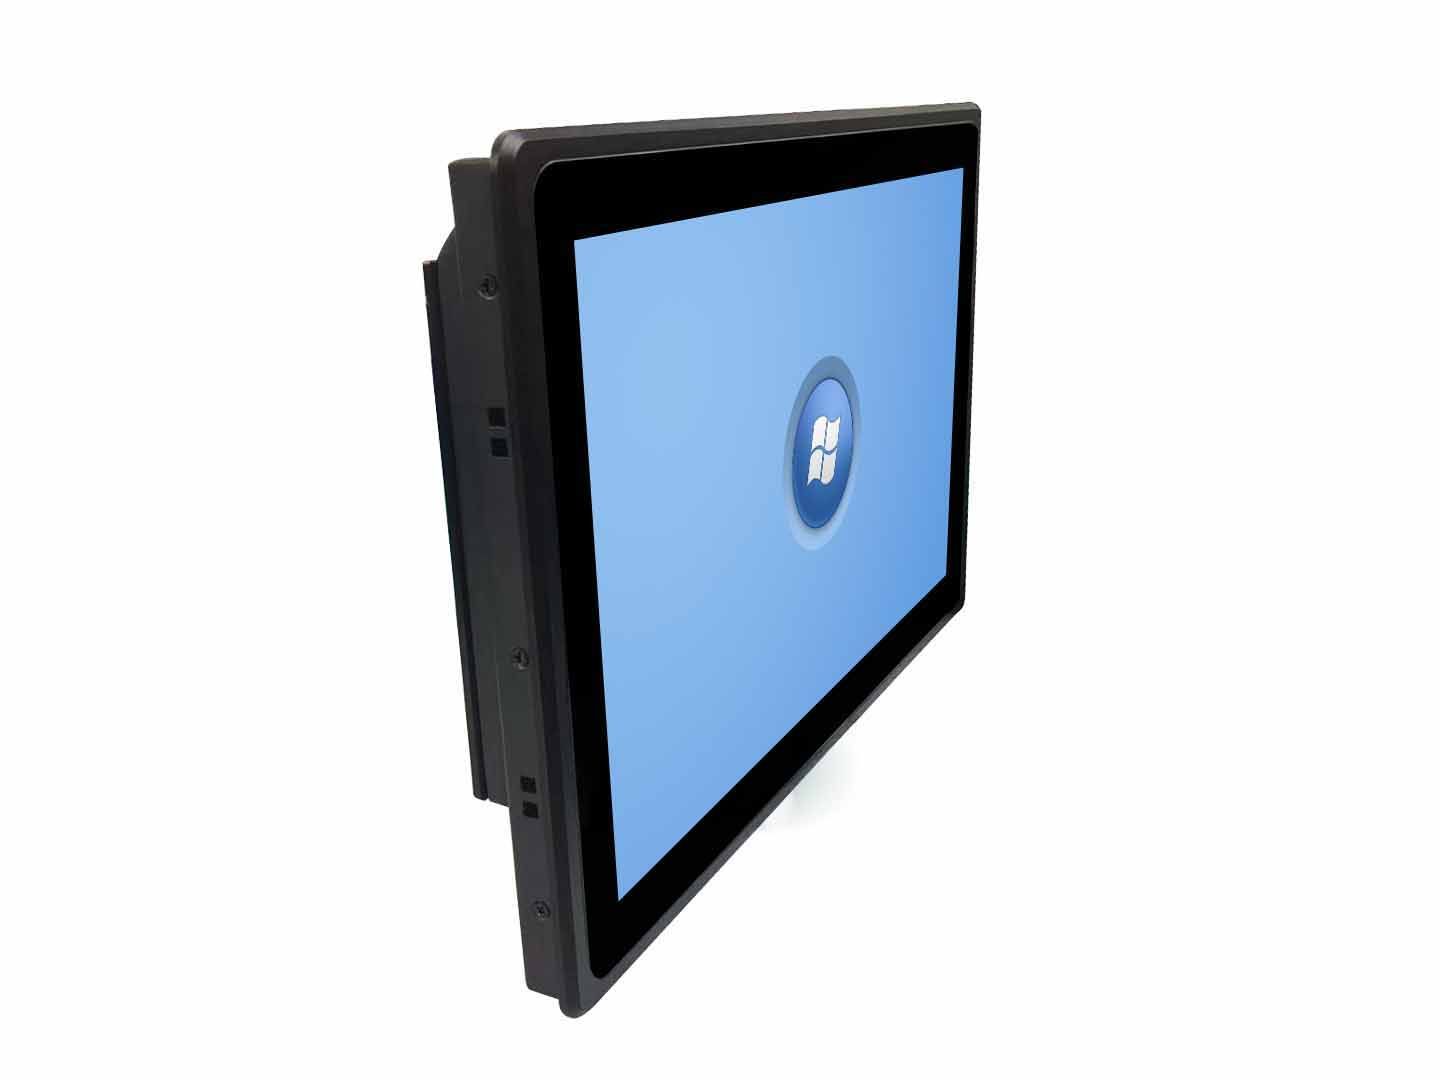 6COM 4USB 2RJ45 15.6" Industrial Touch Panel PC